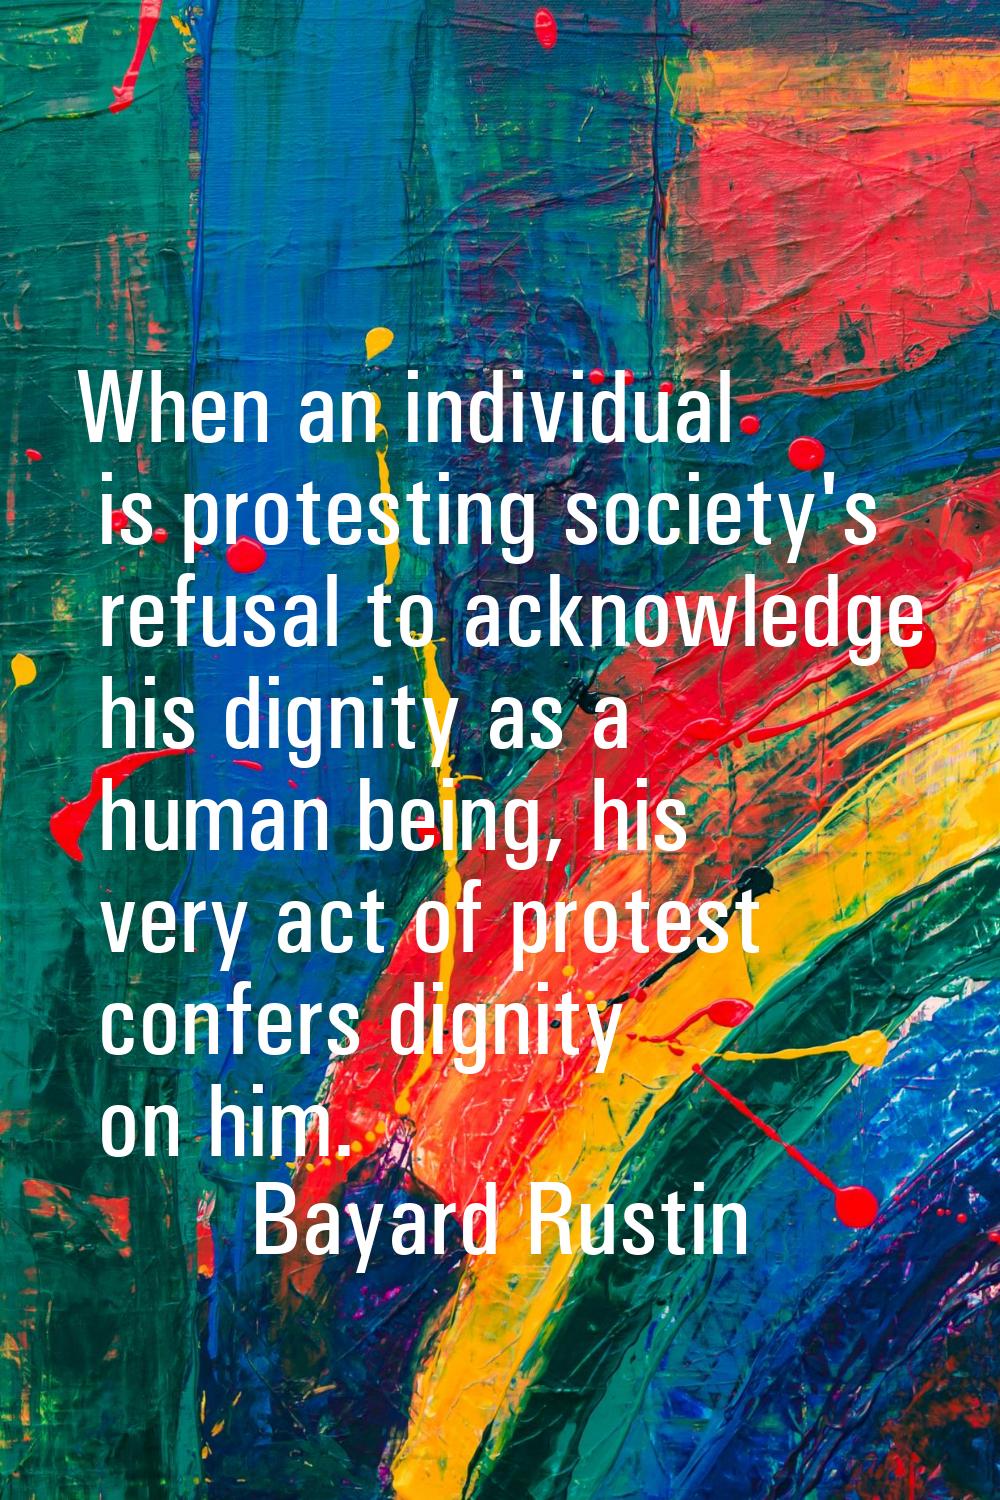 When an individual is protesting society's refusal to acknowledge his dignity as a human being, his